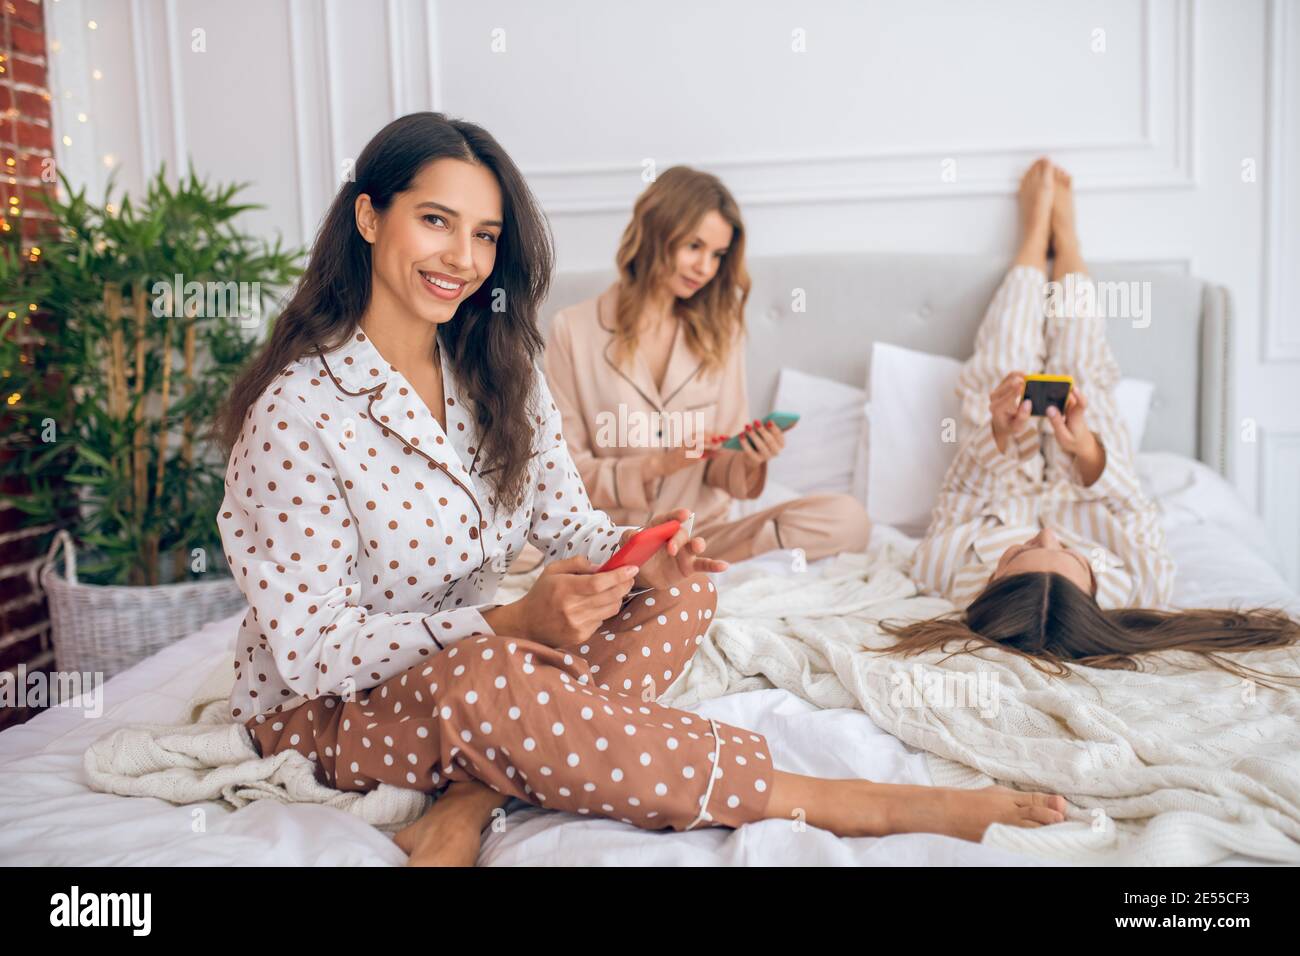 Girls with smartphones lying on bed and surfing internet Stock Photo